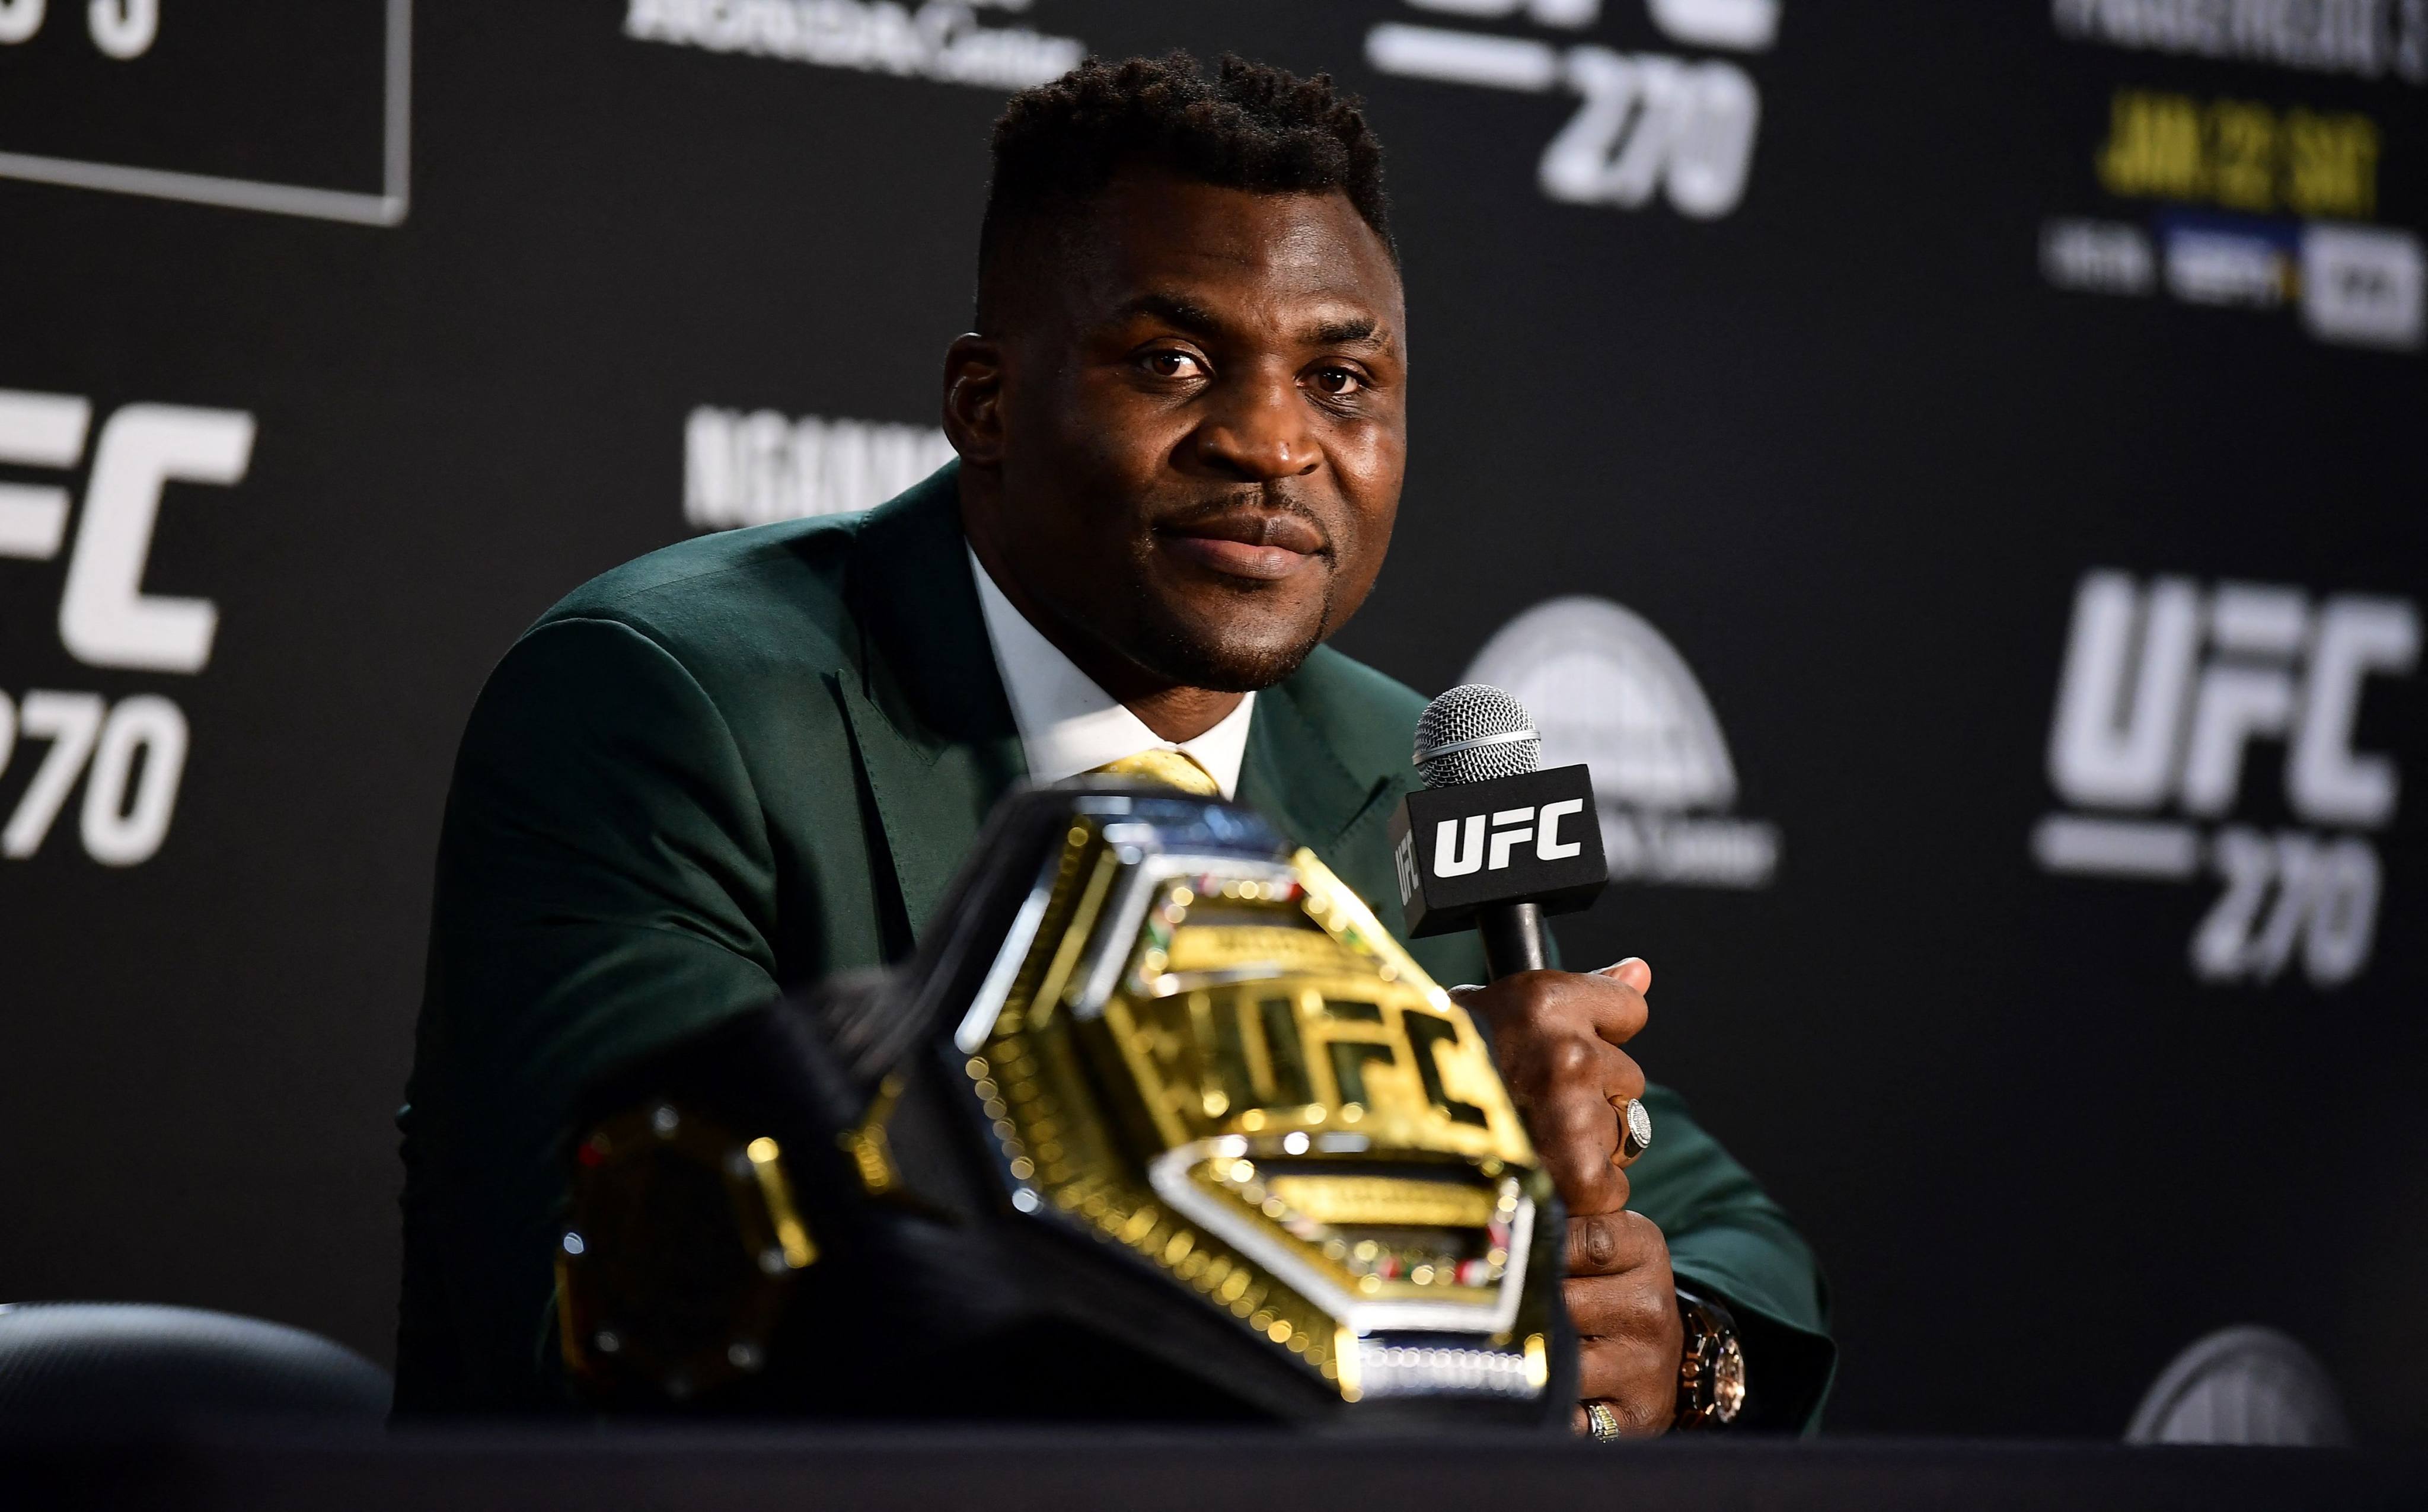 Francis Ngannou speaks to the media after defeating Ciryl Gane in their UFC 270 title fight. Photo: AFP